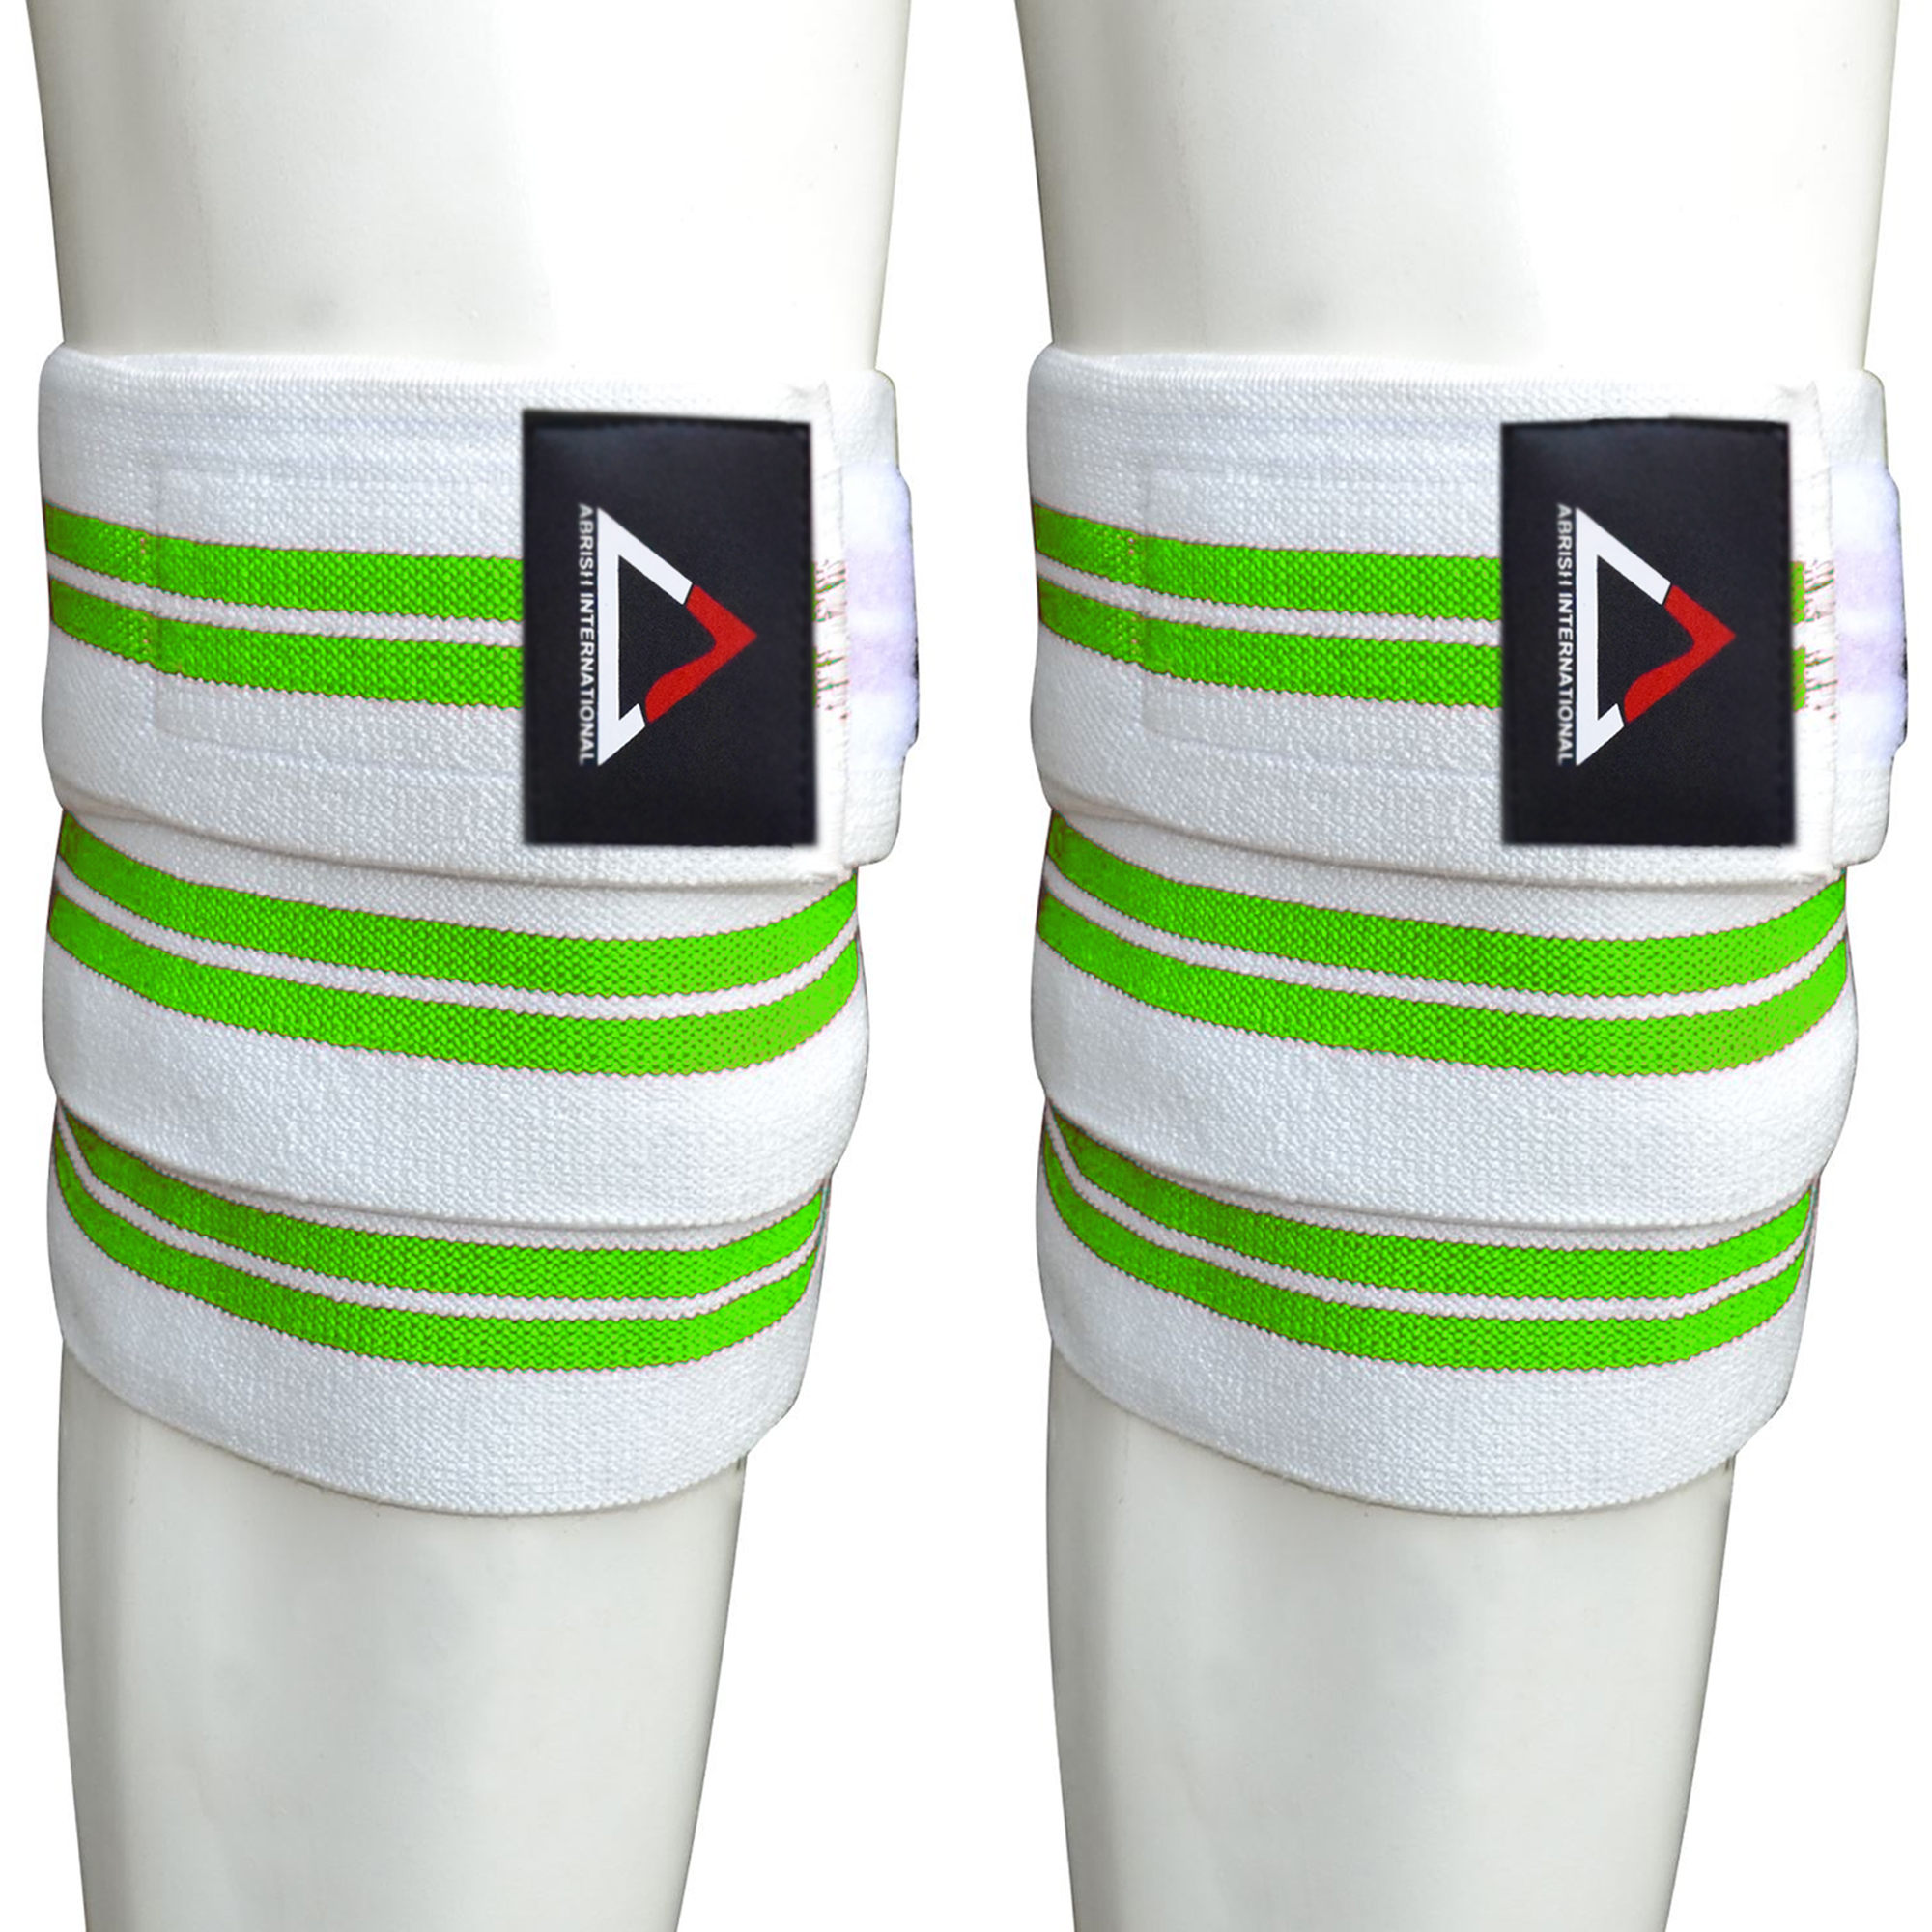 White with Green Lining Knee Wraps